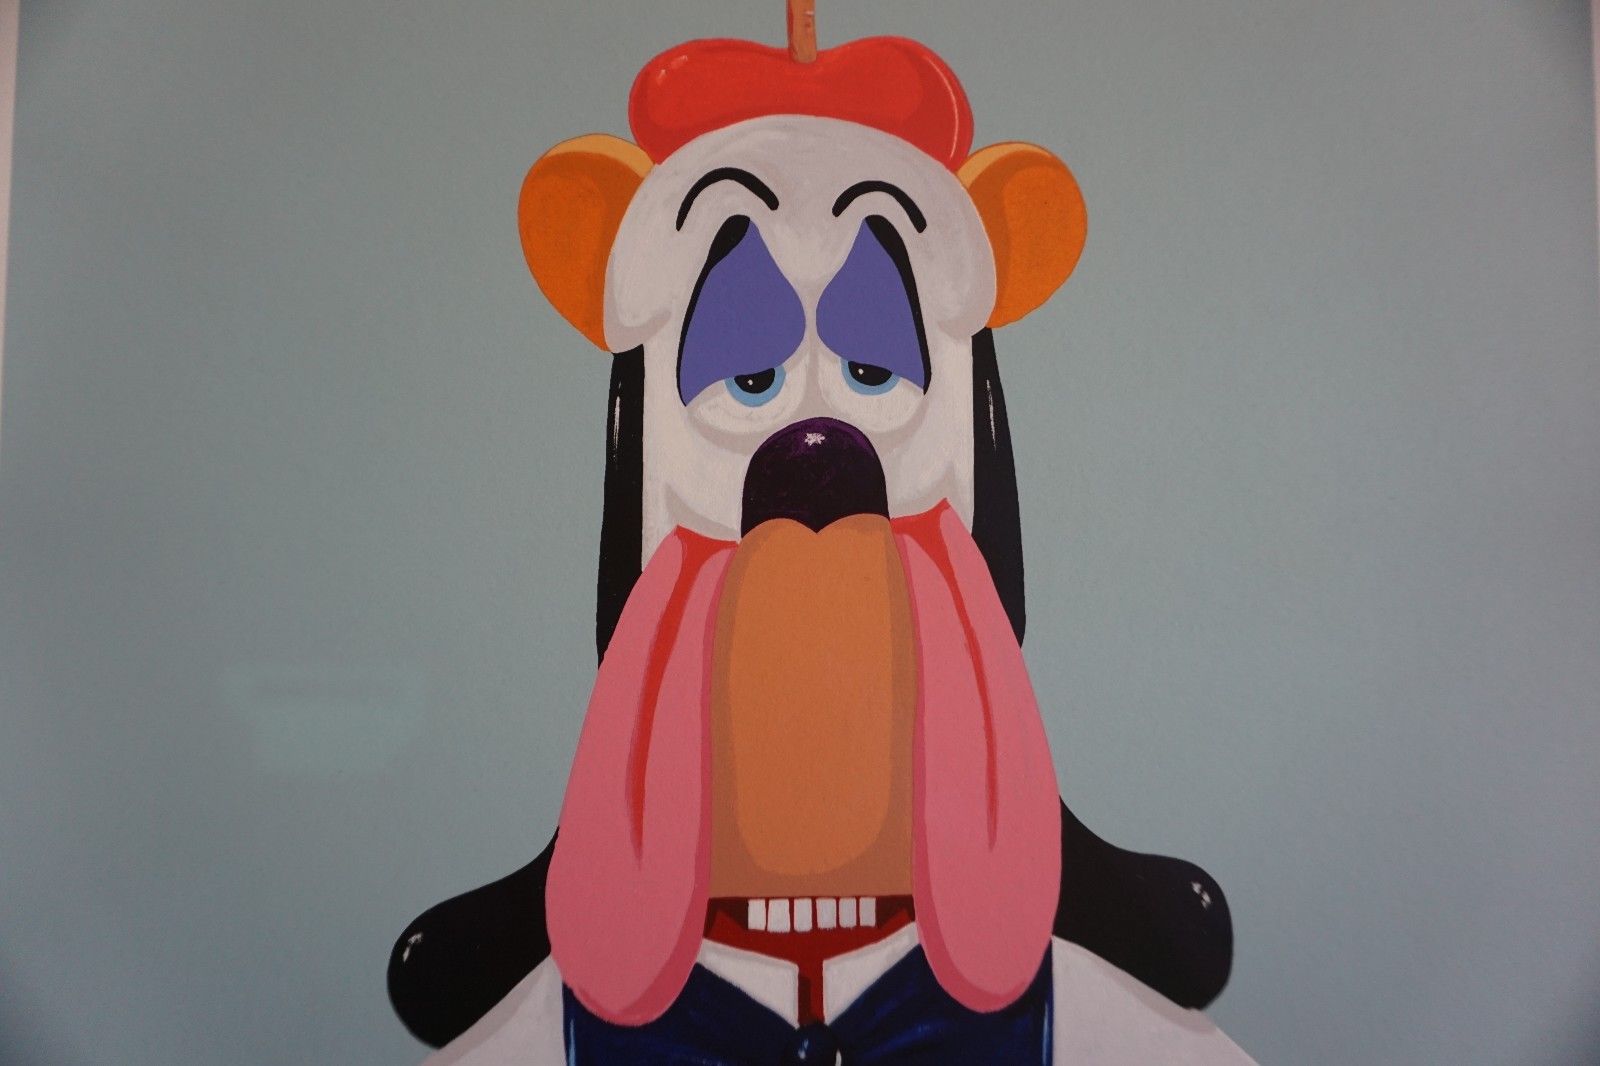 George Condo - Droopy Dog Abstraction Print